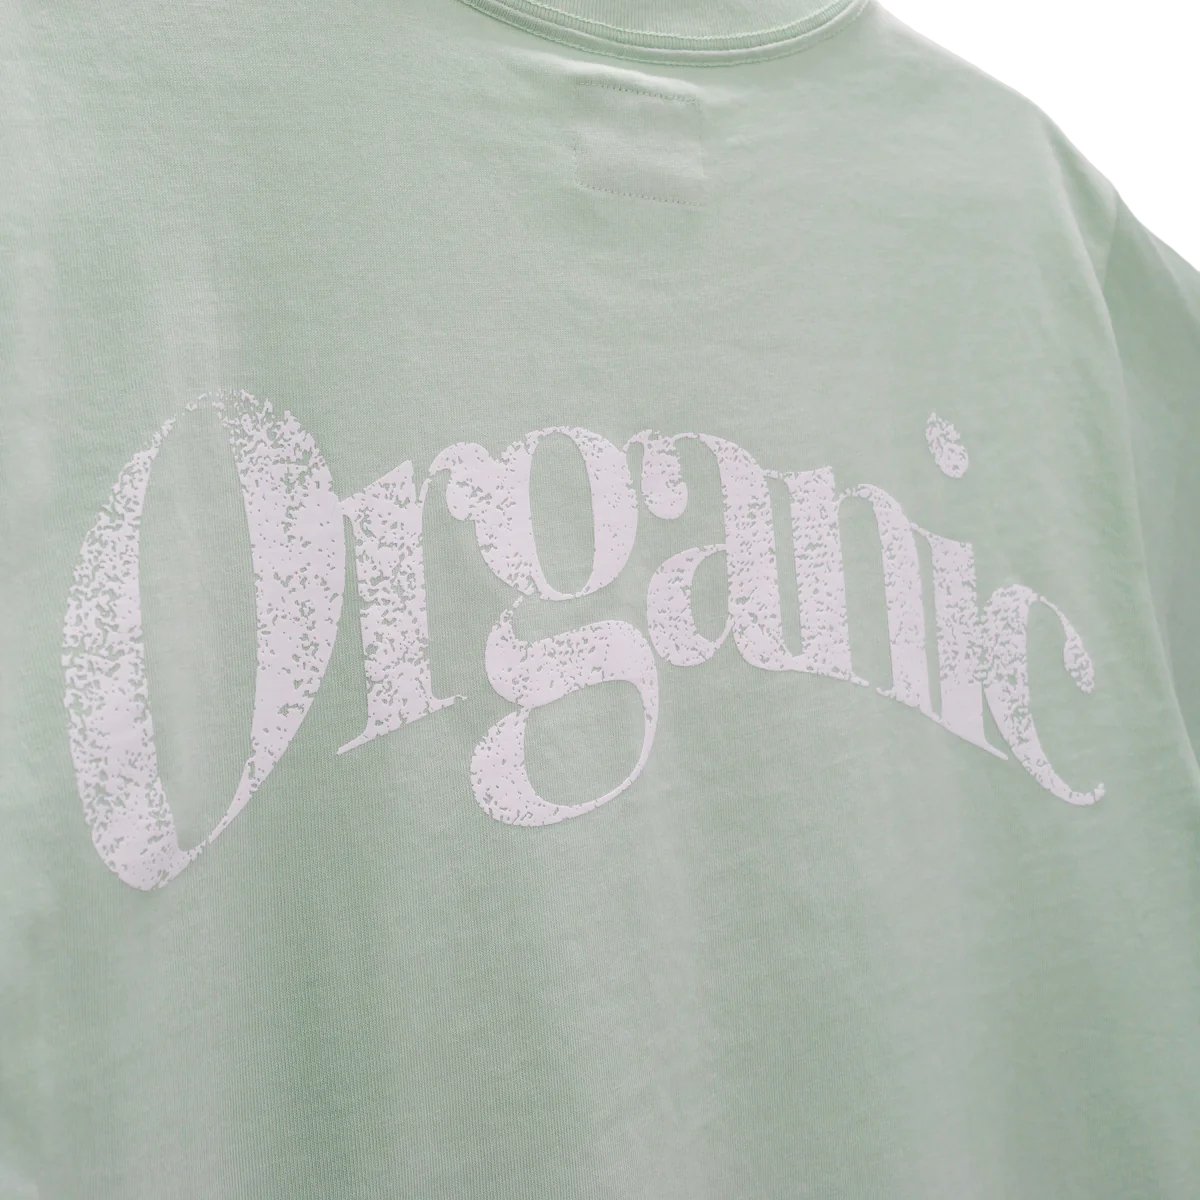 Light green 100% Cotton t-shirt with the YESTERDAY IS DEAD NATURES CHILD TEE SAGE printed in white distressed lettering.